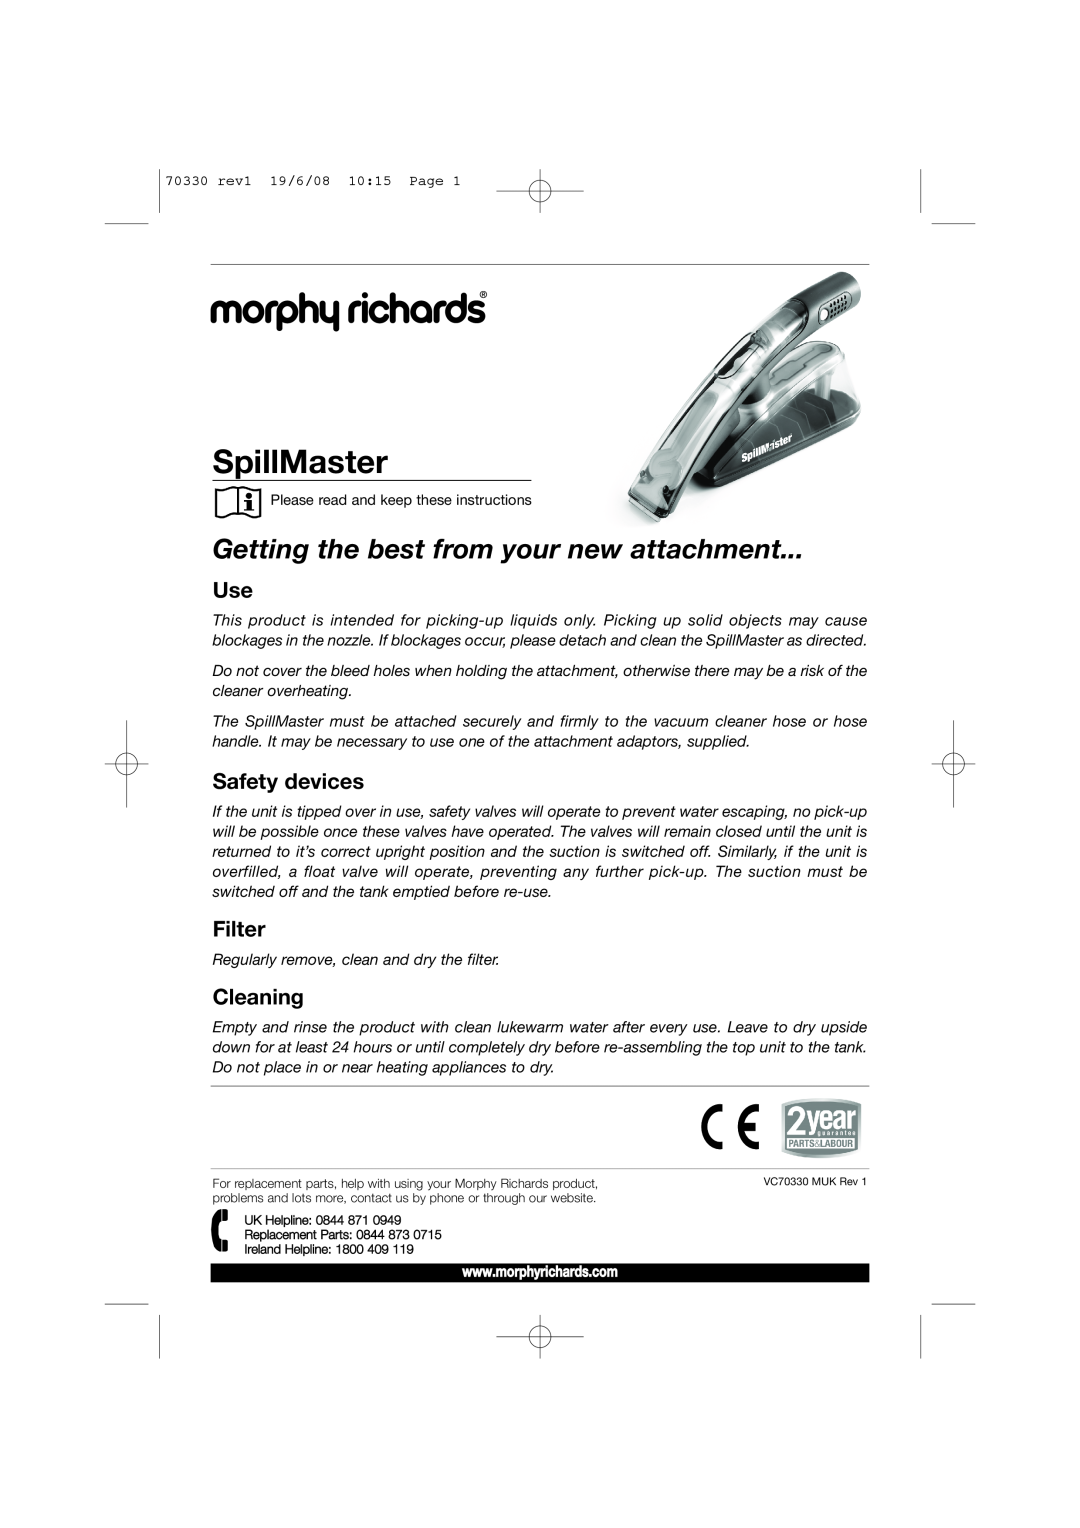 Morphy Richards SpillMaster manual Getting the best from your new attachment, Safety devices, Filter, Cleaning 